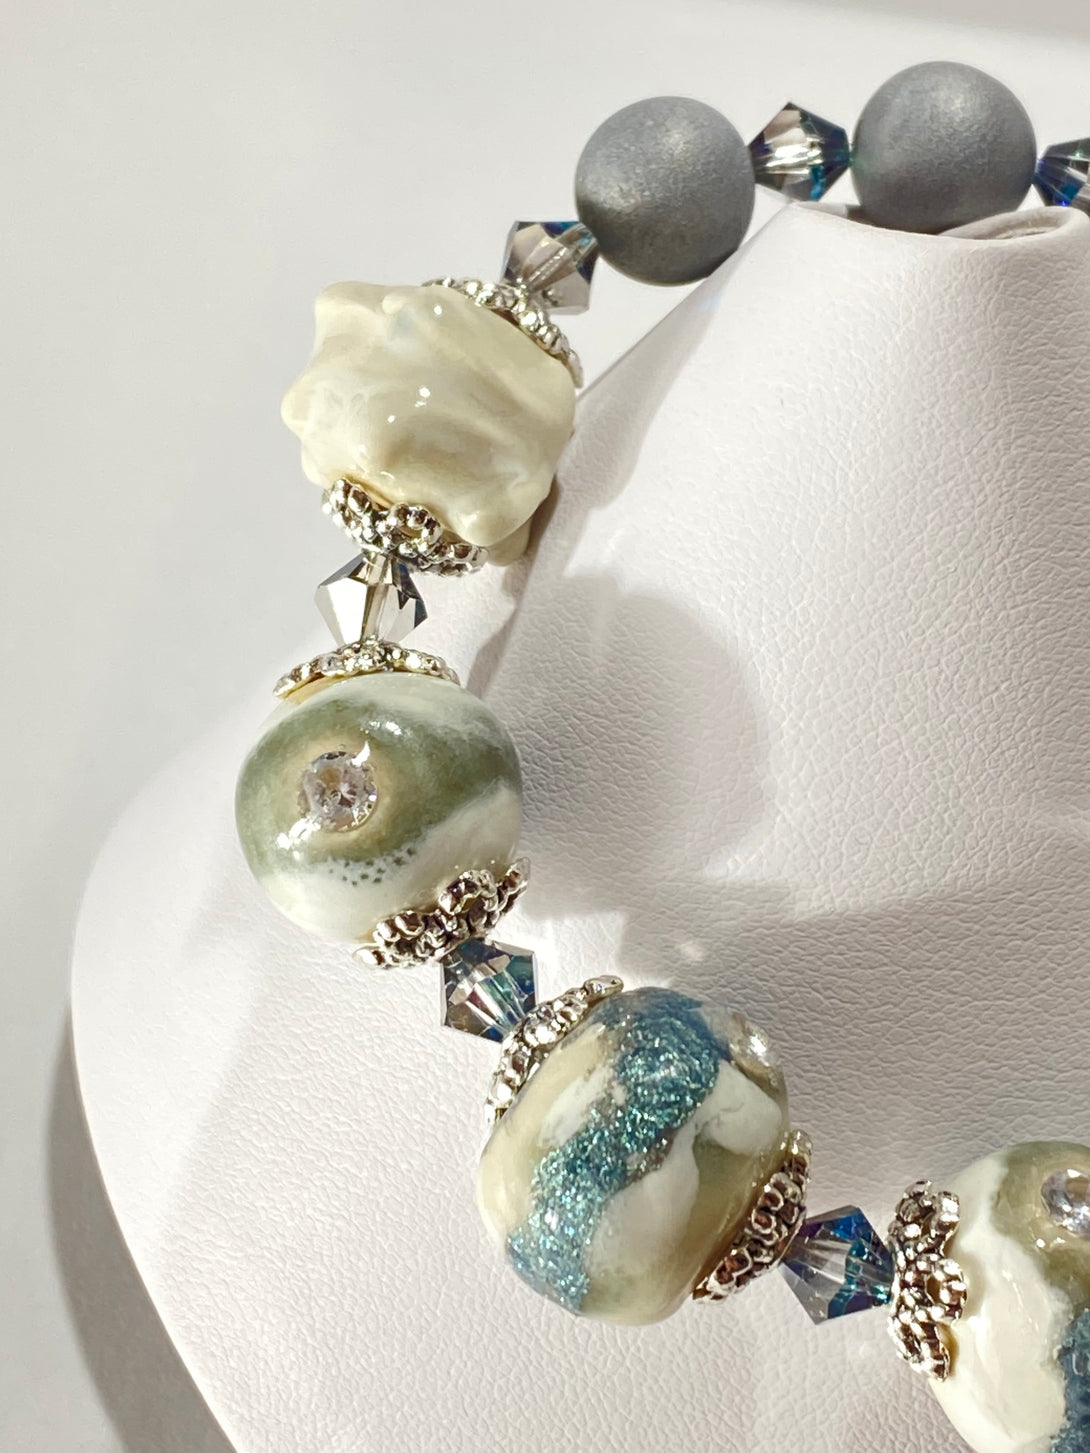 Mary Flores - Bracelet - porcelain beads, druzy, crystals - MAC-Donation - McMillan Arts Centre Gallery, Gift Shop and Box Office - Vancouver Island Art Gallery